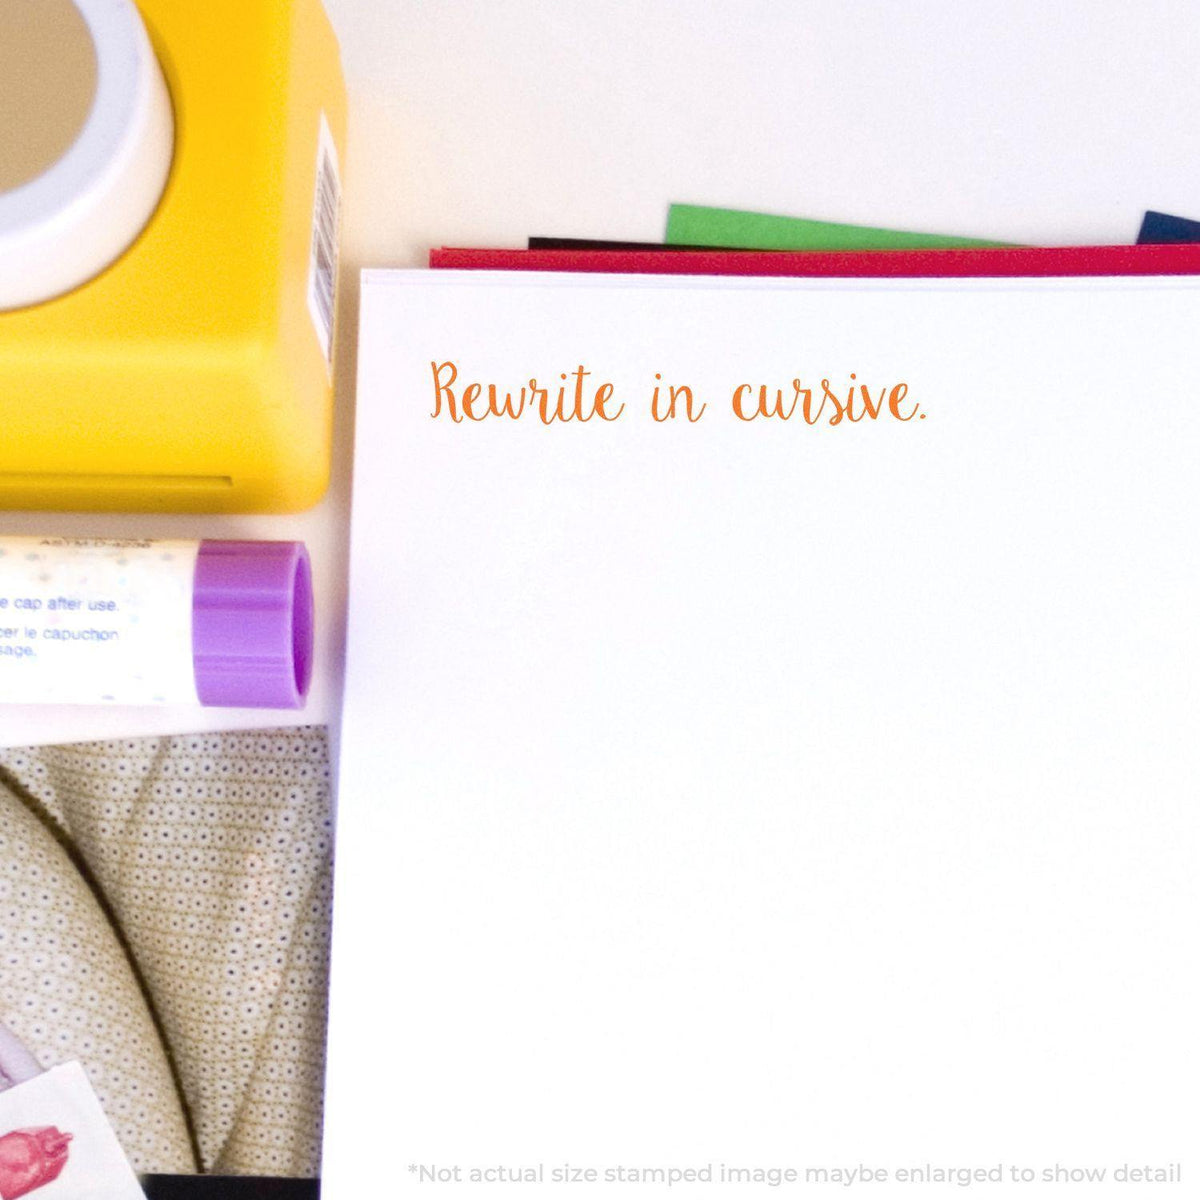 In Use Large Script Rewrite in Cursive Rubber Stamp Image